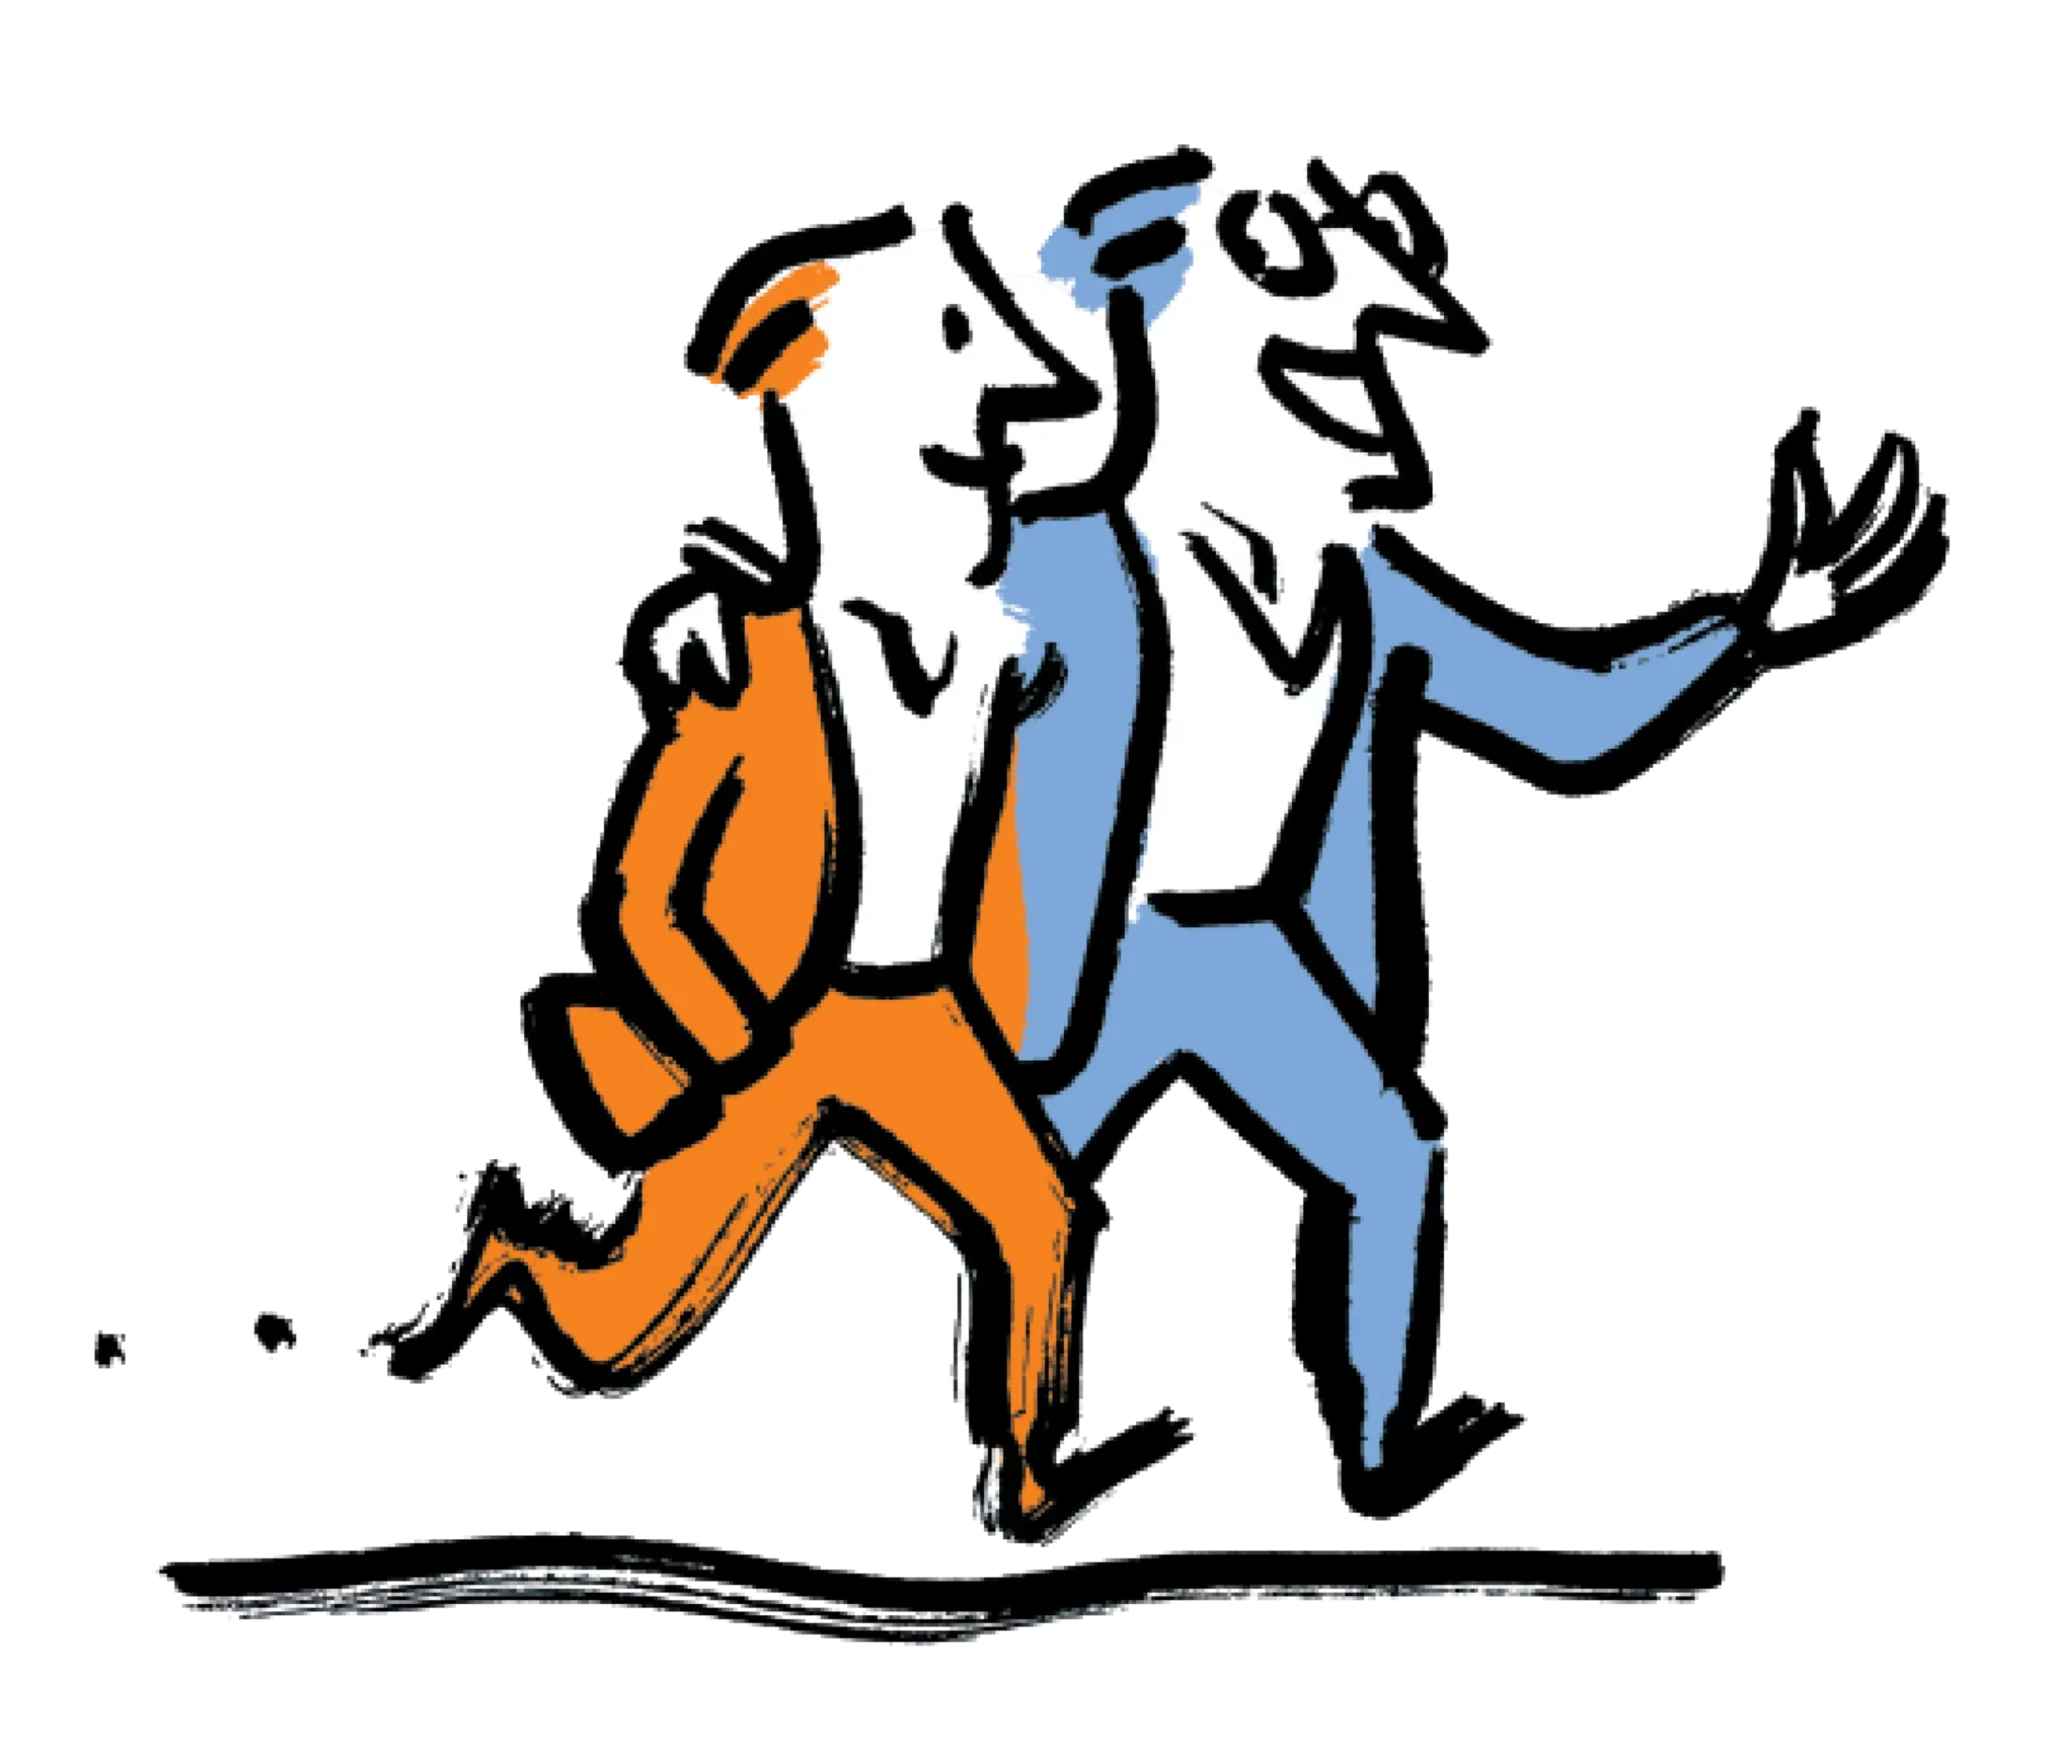 Two men walk side by side, one is wearing an orange suit and the other is wearing a blue suit. The built suited man has his arm around his companion, and is talking to him spiritedly.